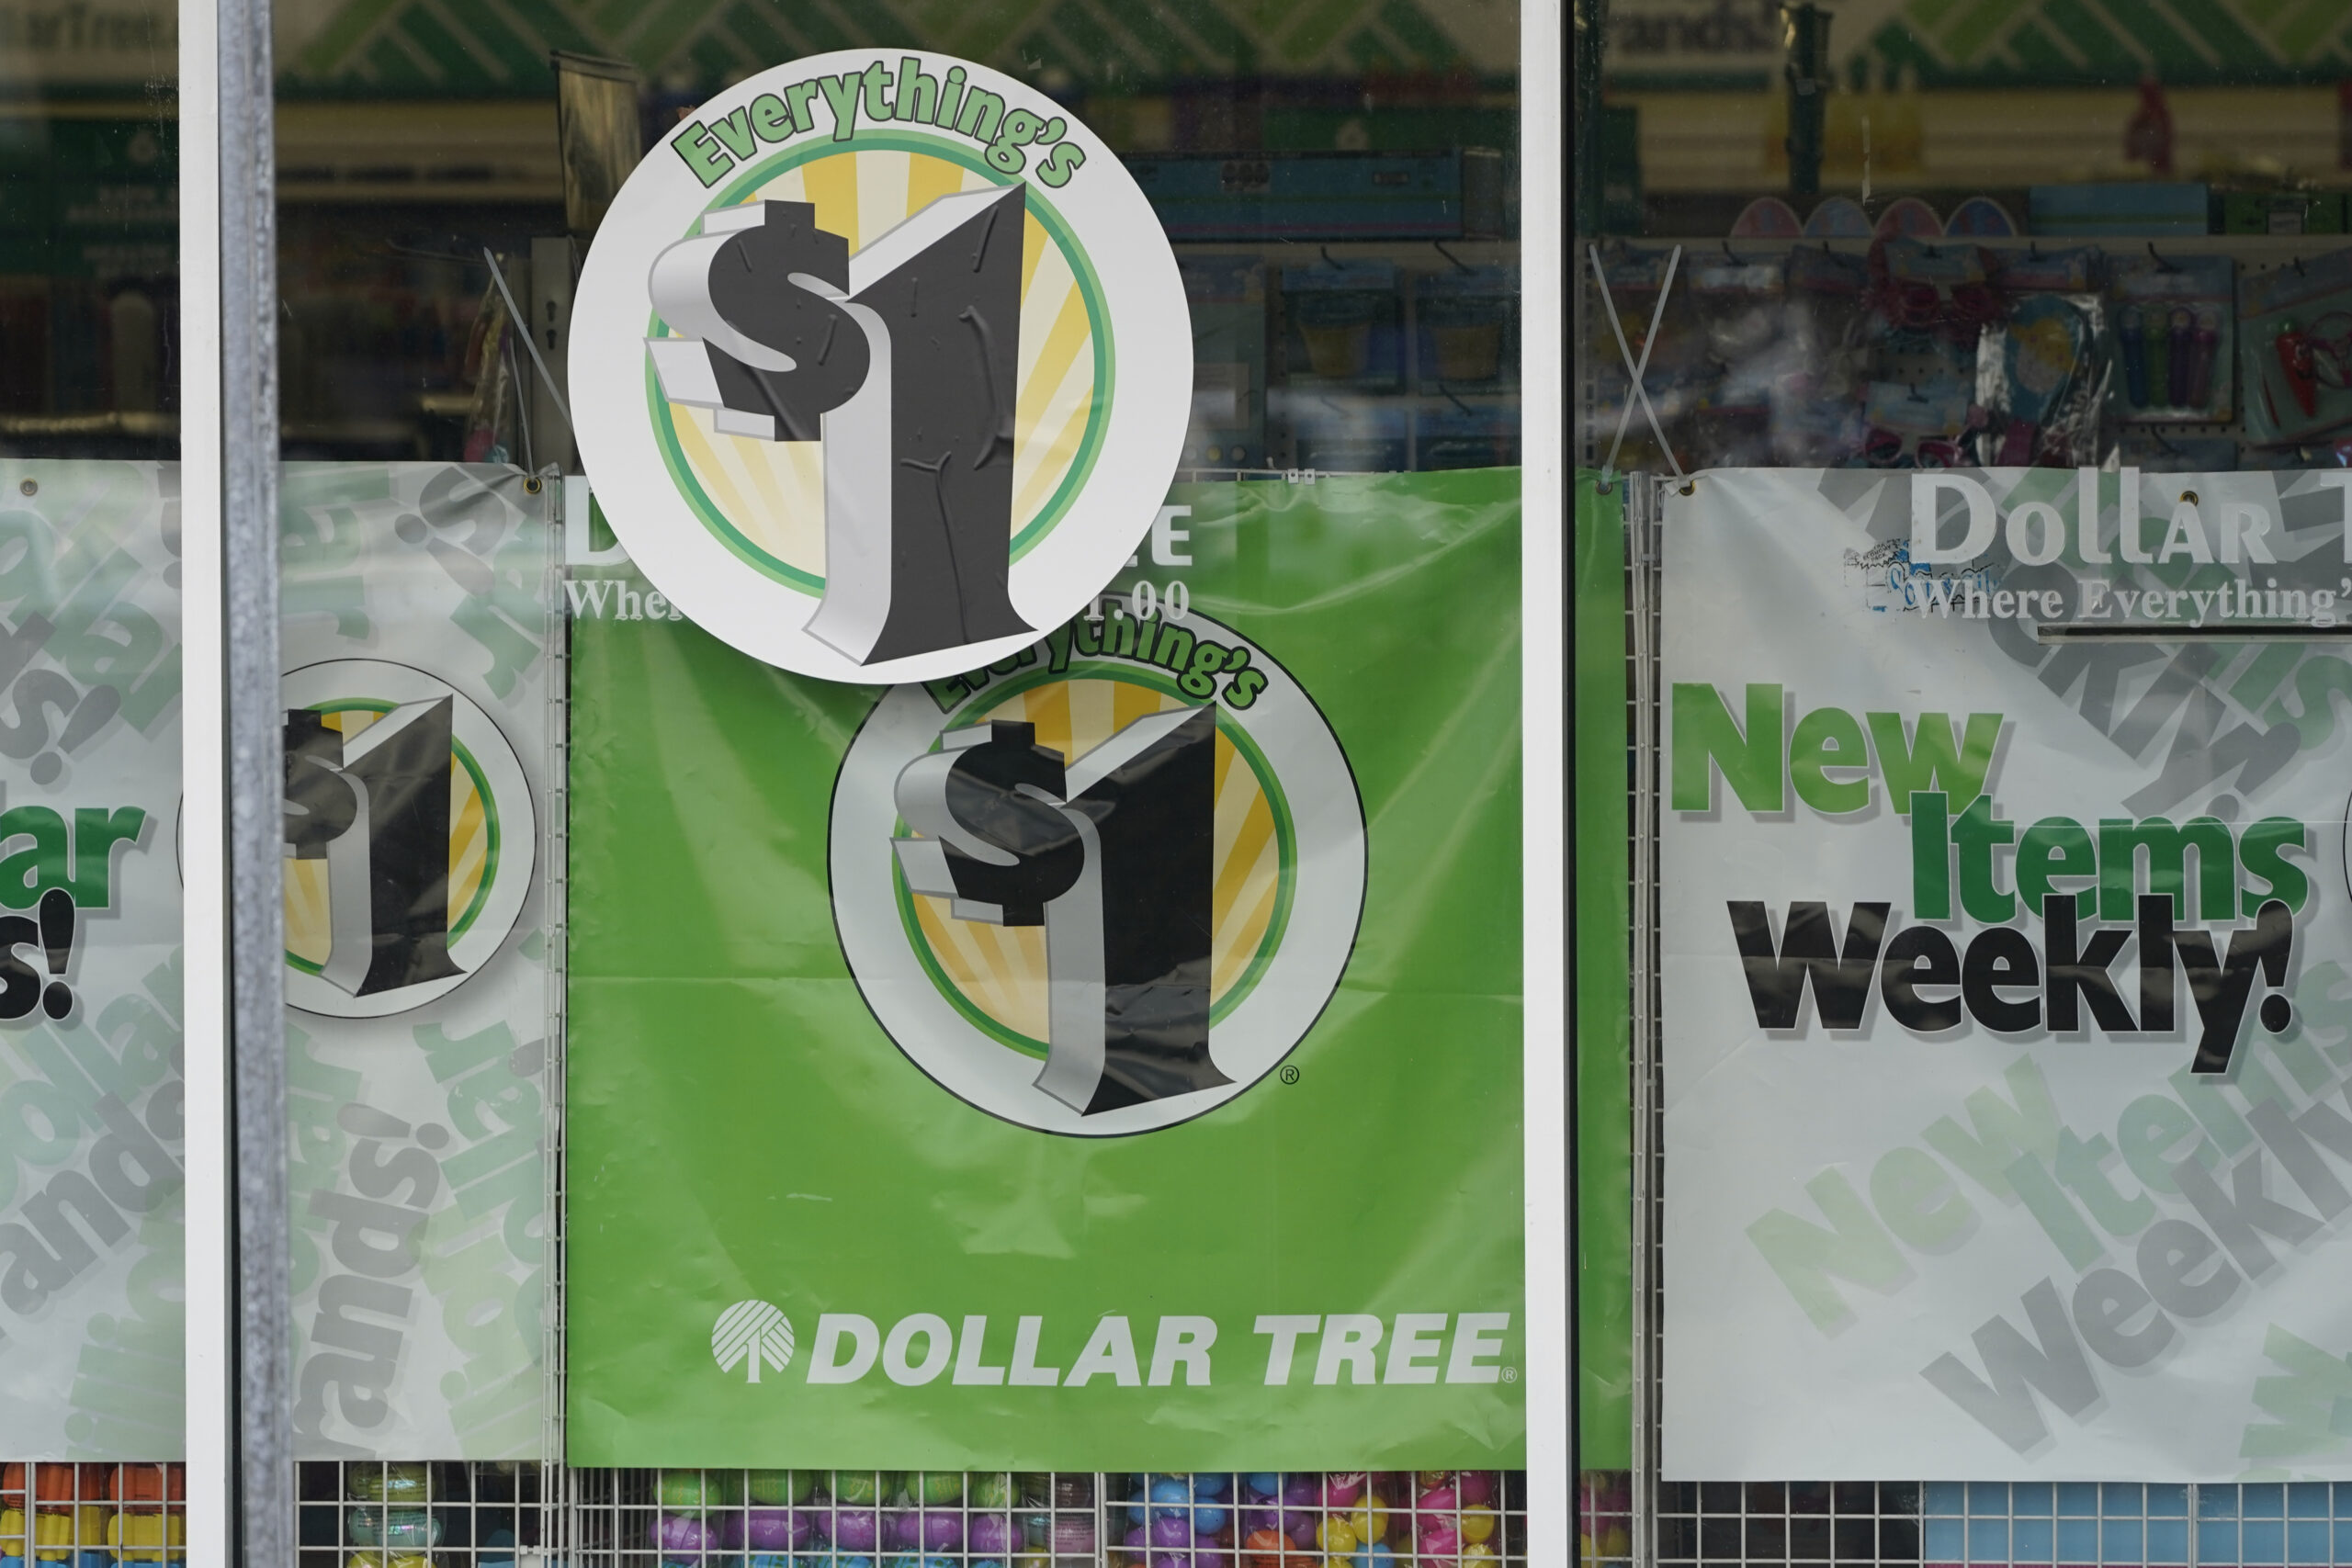 In this Feb. 25, 2021 photo, Dollar Tree store logos indicating that everything in the store is for $1 are promoted on its storefront window in Jackson, Miss. Dollar Tree, the national chain of stores that promises everything from a buck, will begin introducing items on its shelves that will exceed $1. The company said, Wednesday, Sept. 29, that it's responding to customer requests and said pushing the $1 barrier will allow for a better mix of products. (AP Photo/Rogelio V. Solis)